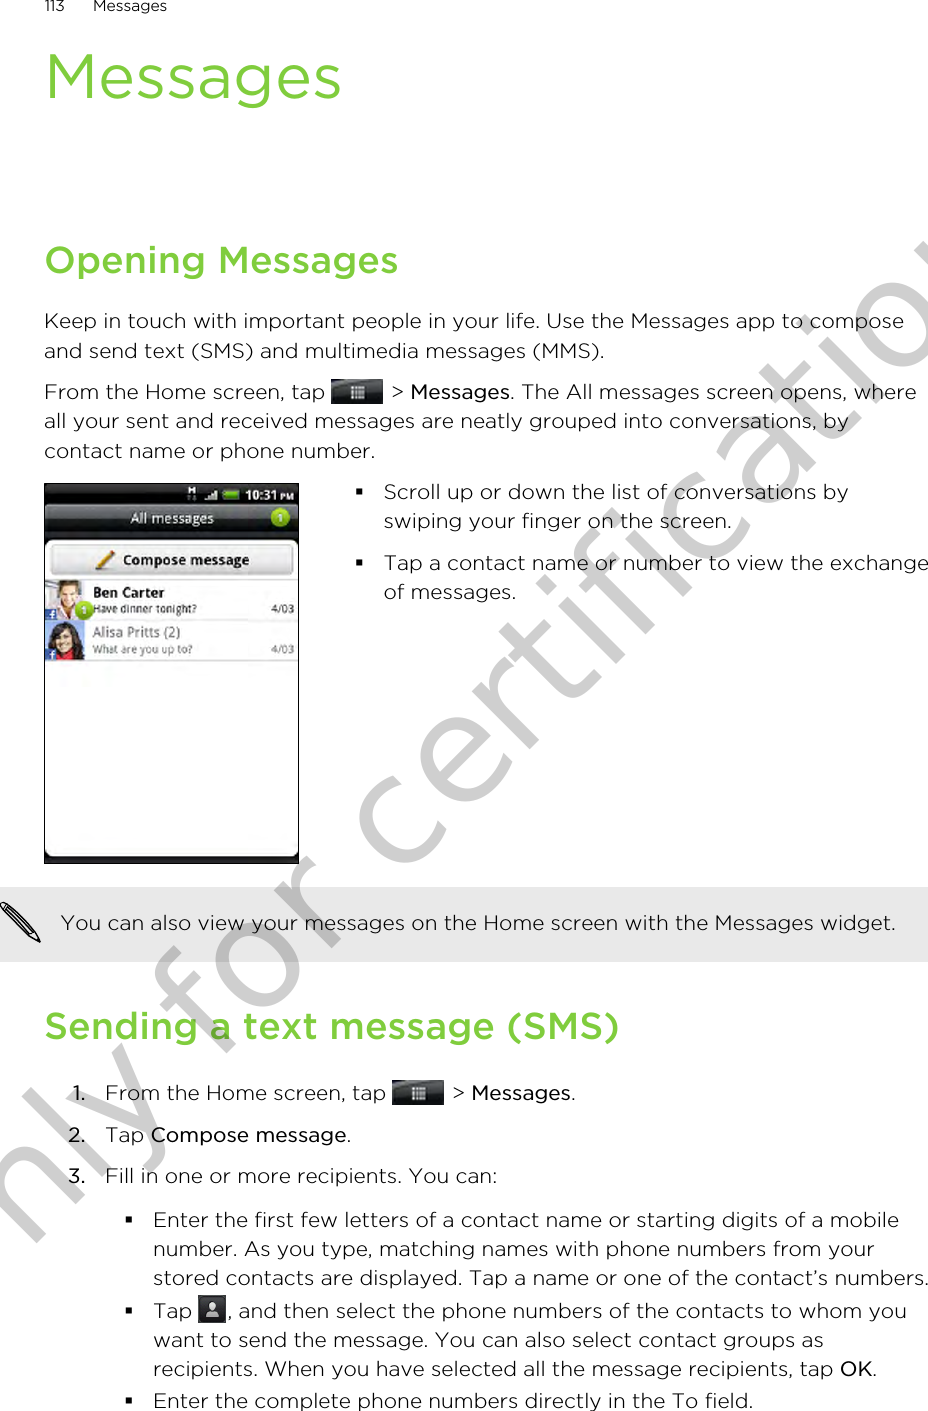 MessagesOpening MessagesKeep in touch with important people in your life. Use the Messages app to composeand send text (SMS) and multimedia messages (MMS).From the Home screen, tap   &gt; Messages. The All messages screen opens, whereall your sent and received messages are neatly grouped into conversations, bycontact name or phone number.§Scroll up or down the list of conversations byswiping your finger on the screen.§Tap a contact name or number to view the exchangeof messages.You can also view your messages on the Home screen with the Messages widget.Sending a text message (SMS)1. From the Home screen, tap   &gt; Messages.2. Tap Compose message.3. Fill in one or more recipients. You can:§Enter the first few letters of a contact name or starting digits of a mobilenumber. As you type, matching names with phone numbers from yourstored contacts are displayed. Tap a name or one of the contact’s numbers.§Tap  , and then select the phone numbers of the contacts to whom youwant to send the message. You can also select contact groups asrecipients. When you have selected all the message recipients, tap OK.§Enter the complete phone numbers directly in the To field.113 MessagesOnly for certification